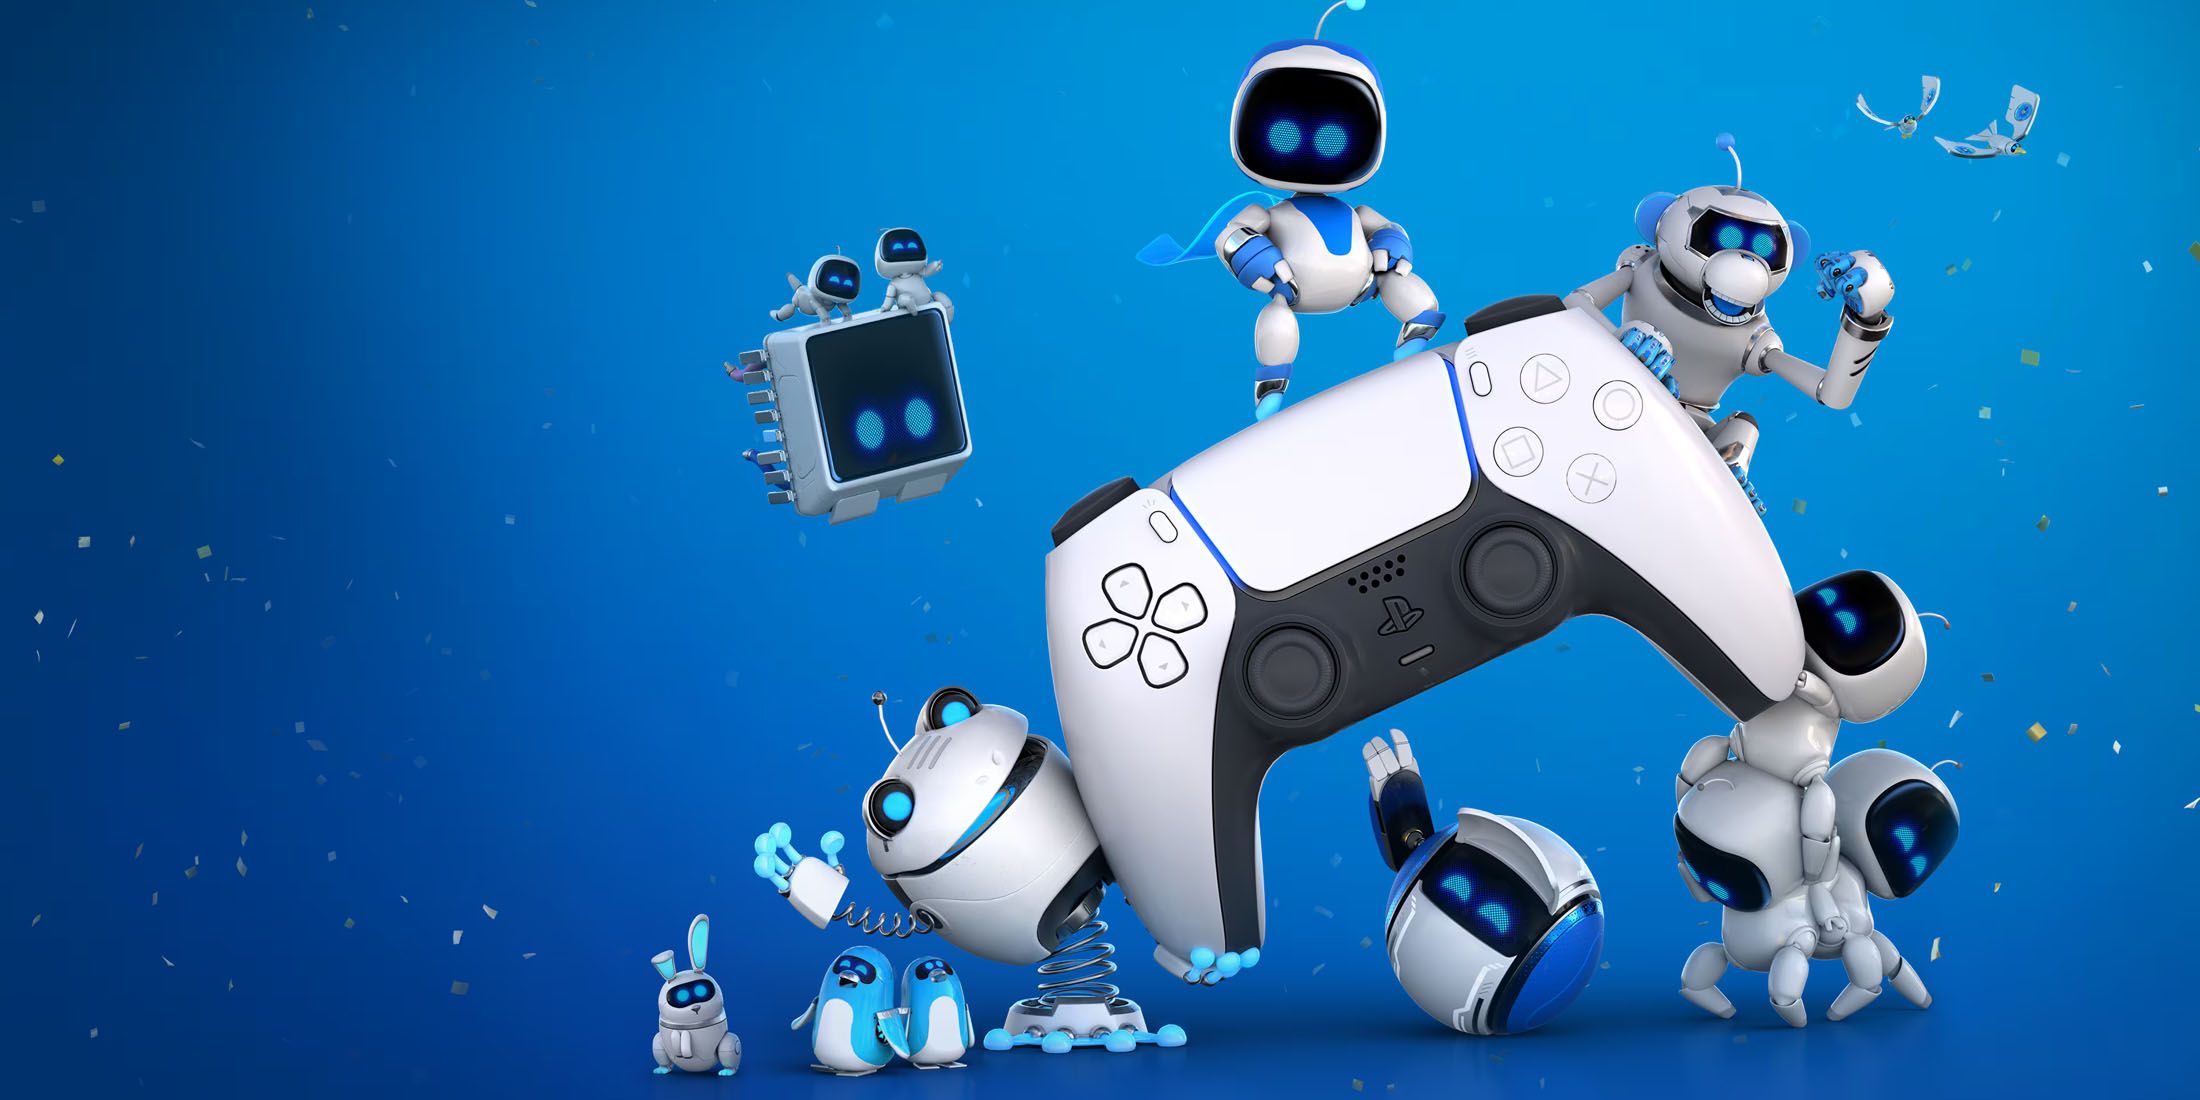 A promotional image of Astro Bot and his friends gathered around a PS5 DualSense controller against a blue background.